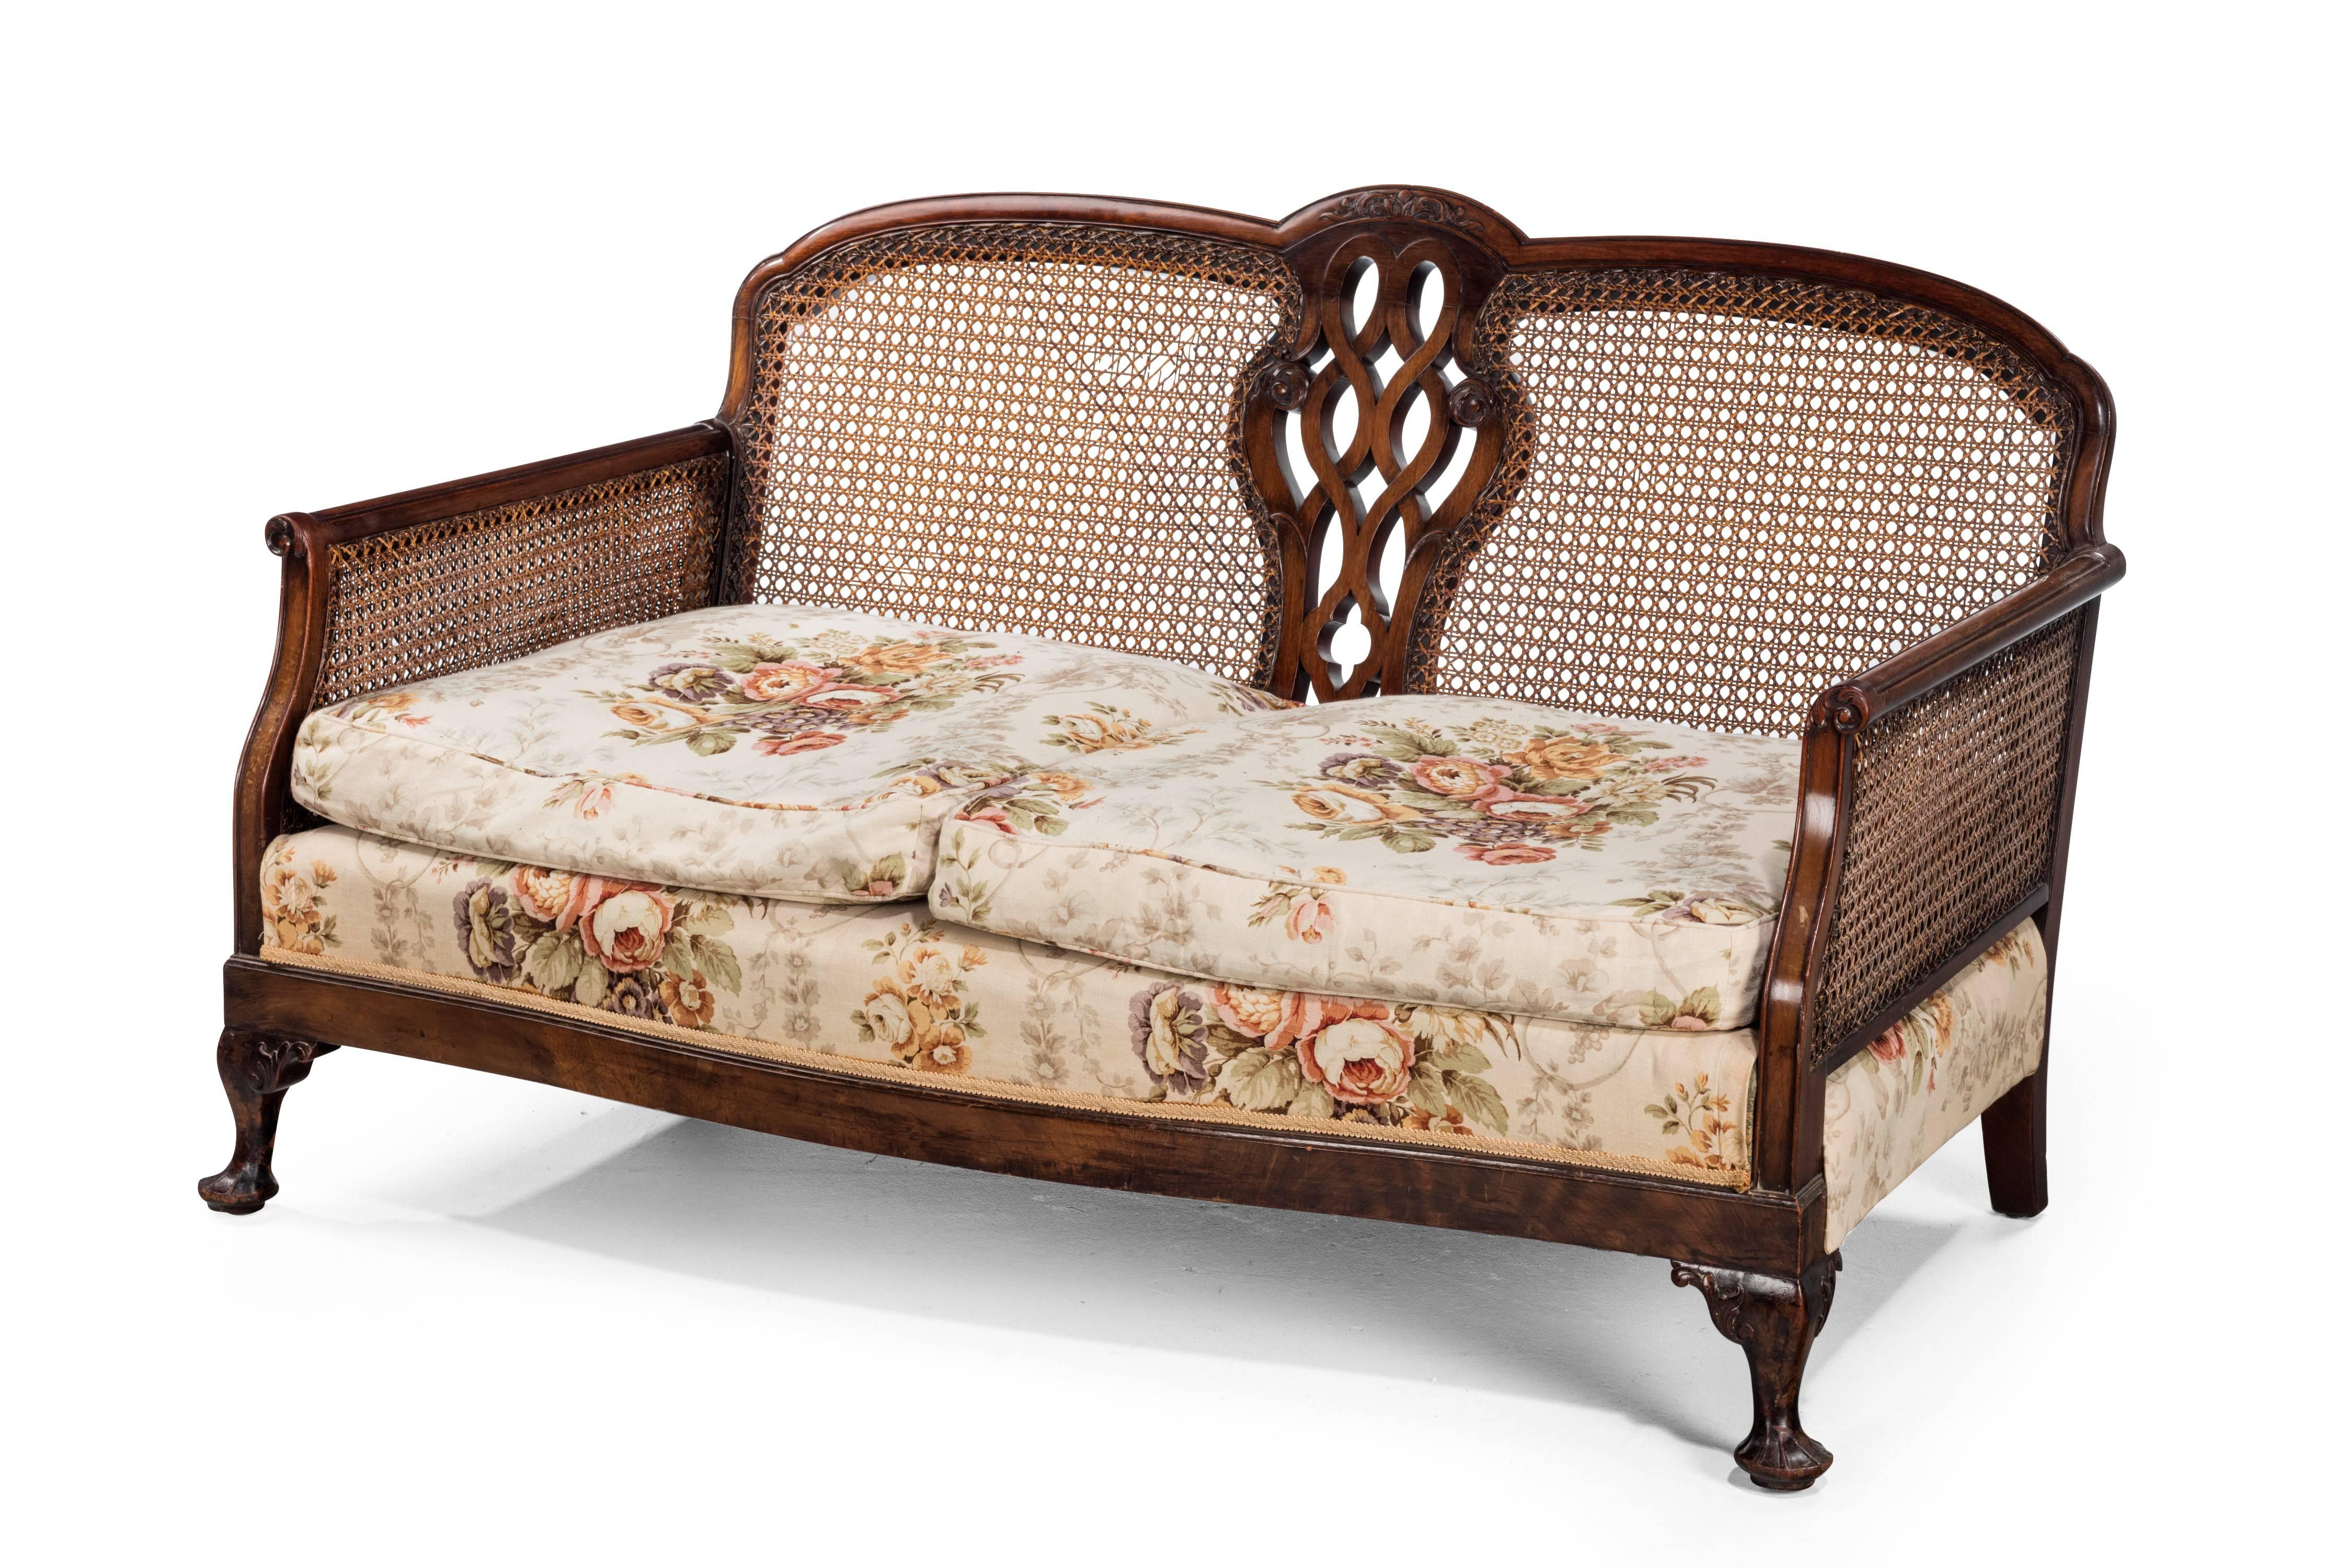 A mahogany framed bergere sofa of small proportions. With good quality original cane work to the sides and back.